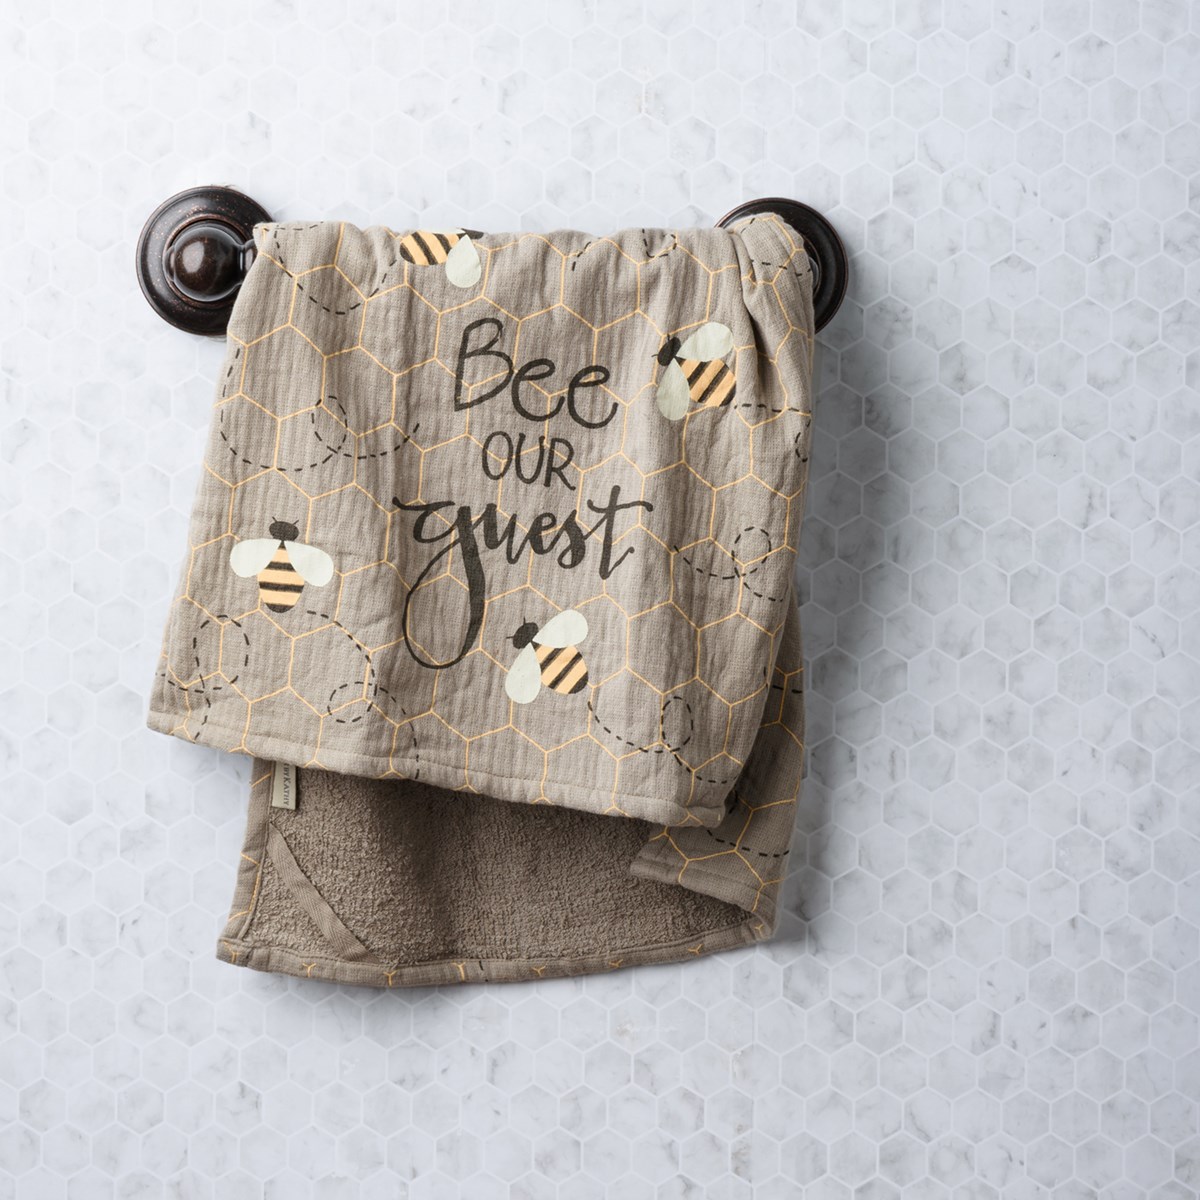 Hand Towel - Bee Our Guest - 16" x 28" - Cotton, Terrycloth